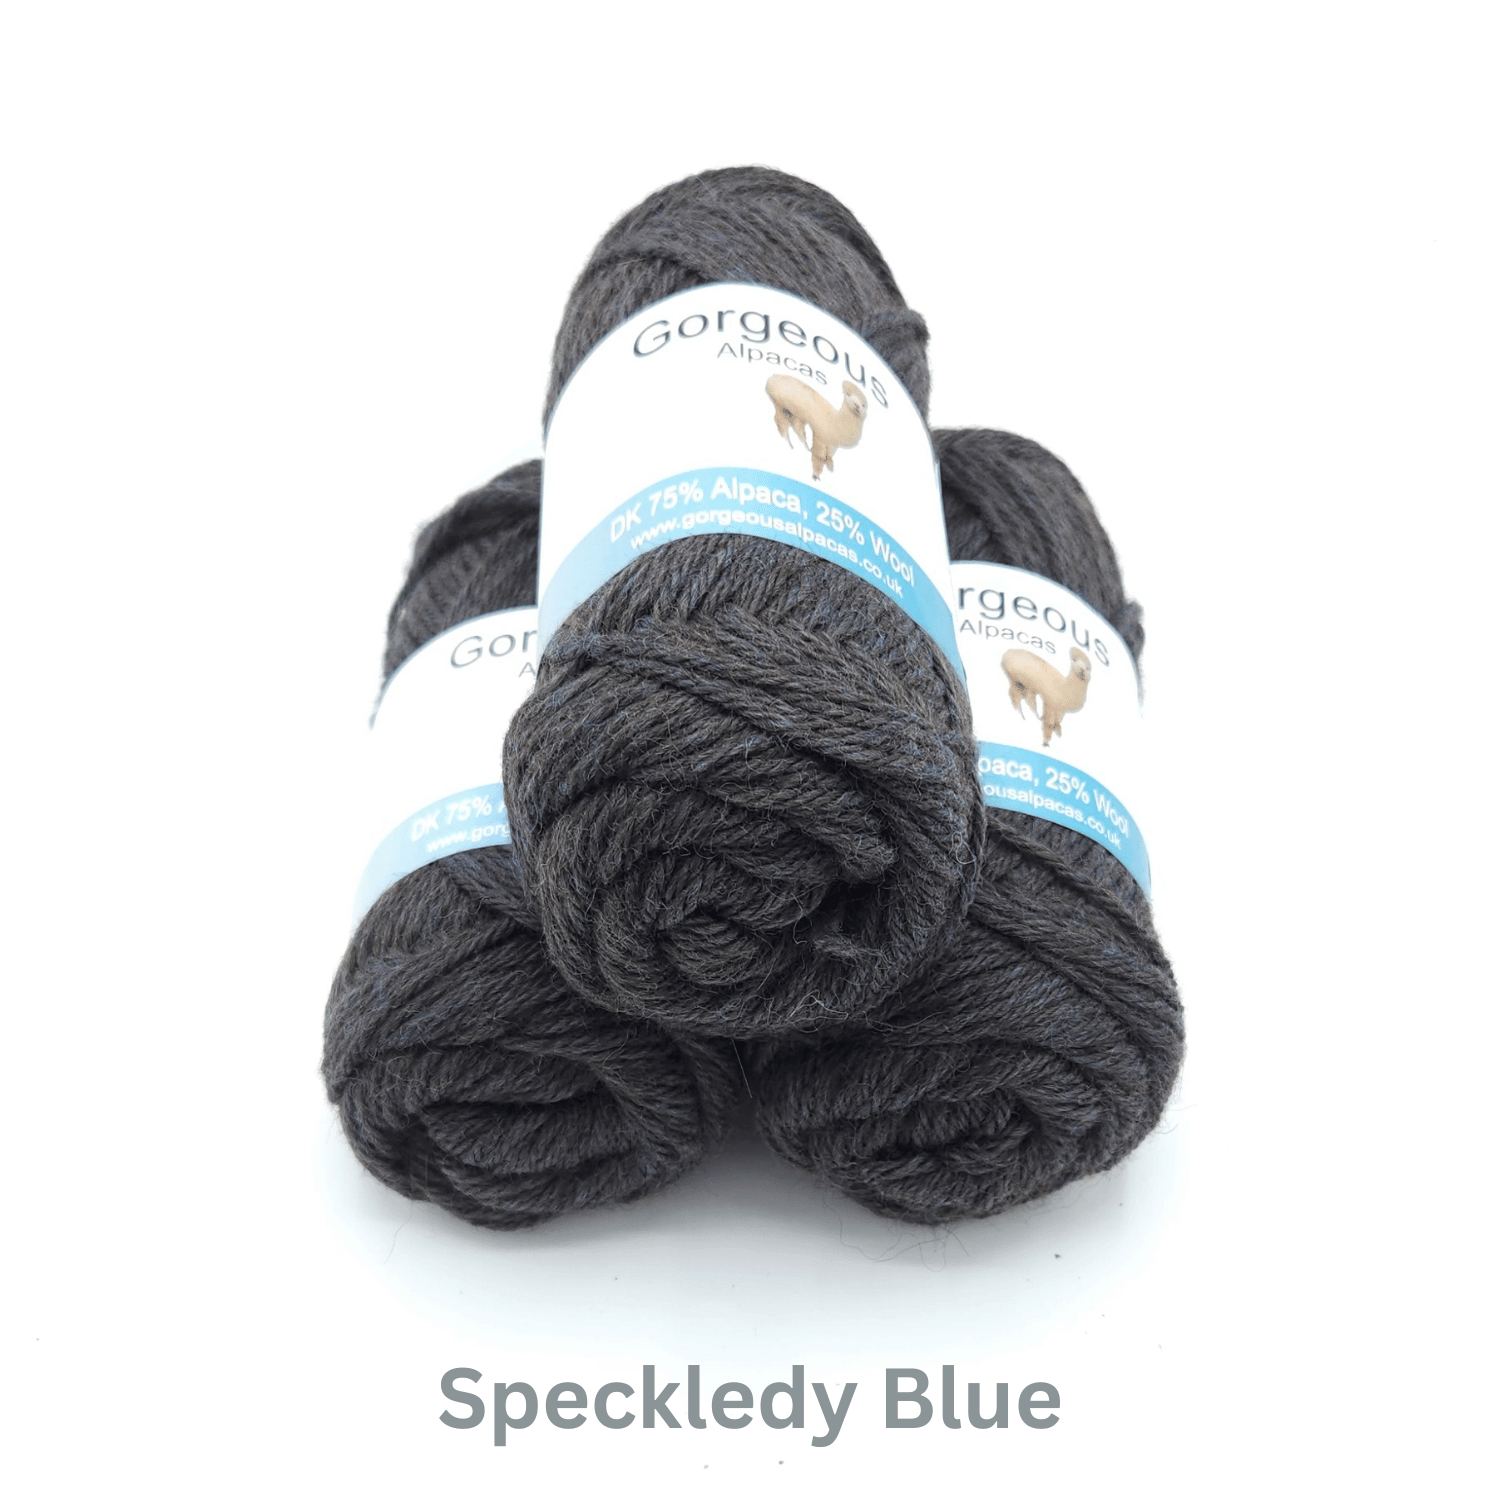 DK alpaca wool from British and Irish farms shown here in Speckledy Blue